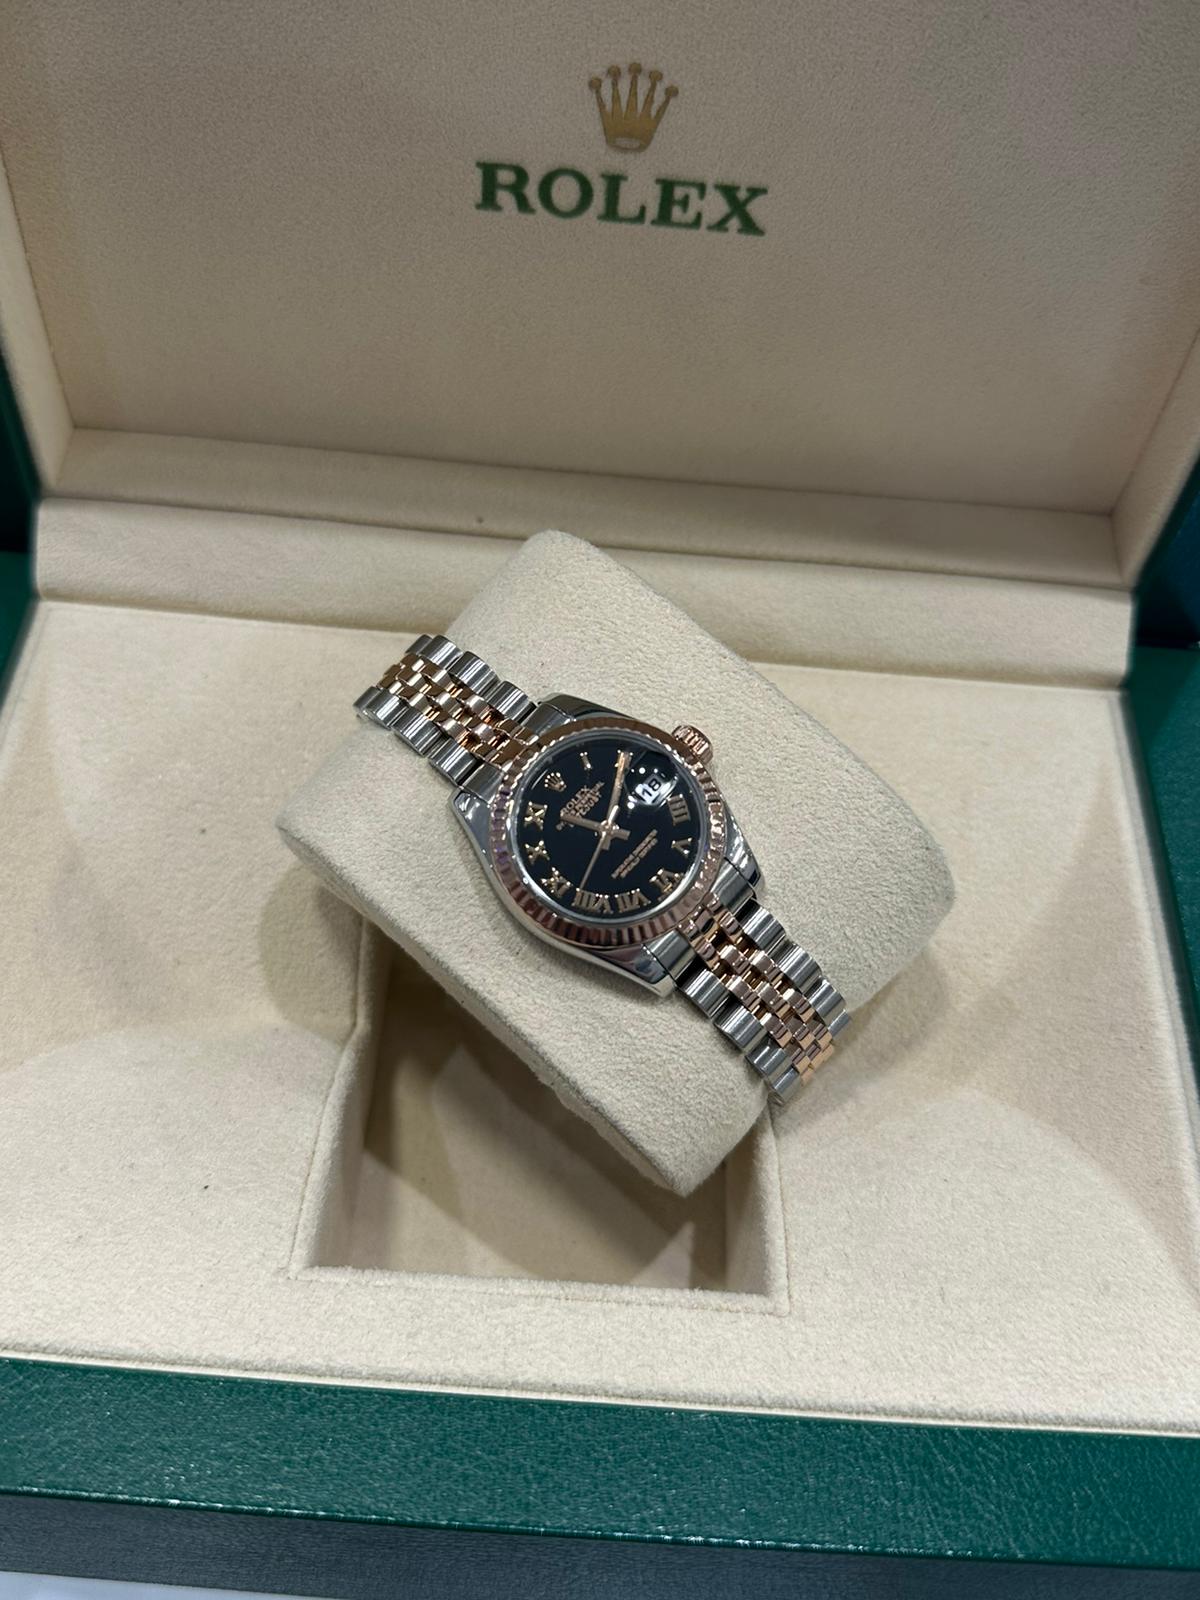 Rolex Datejust 26mm steel and rose gold - 179171 2 - Image 3 of 10